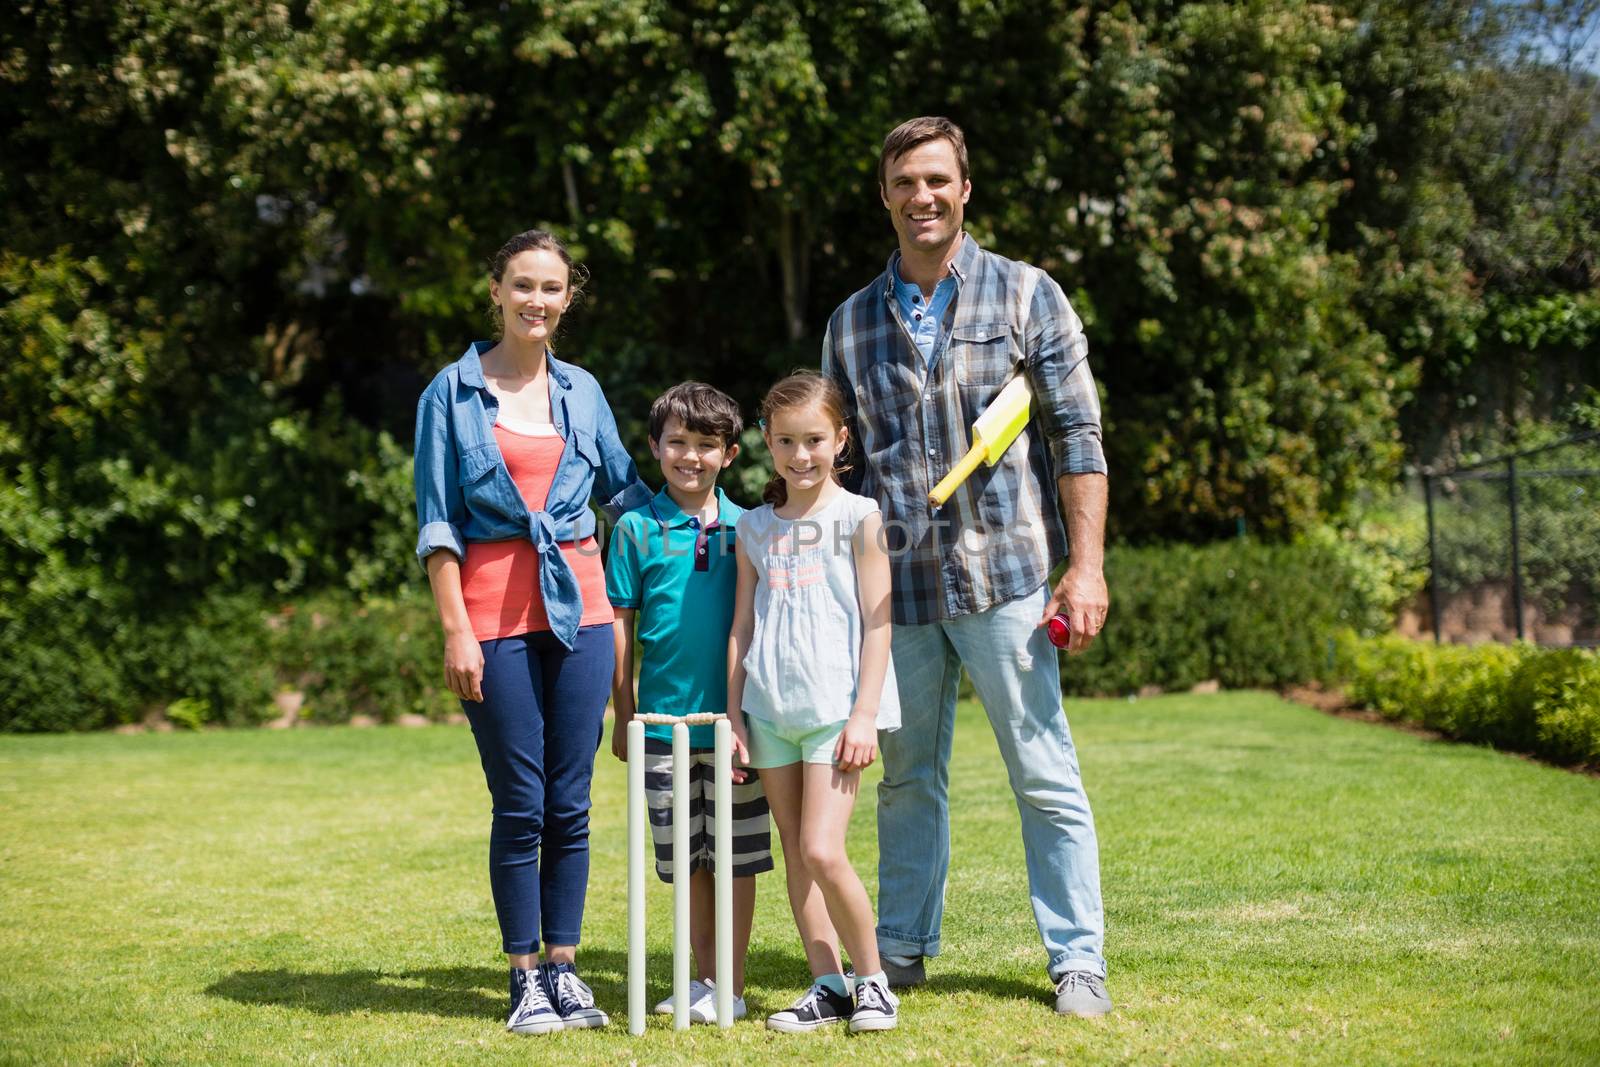 Family playing cricket in park by Wavebreakmedia